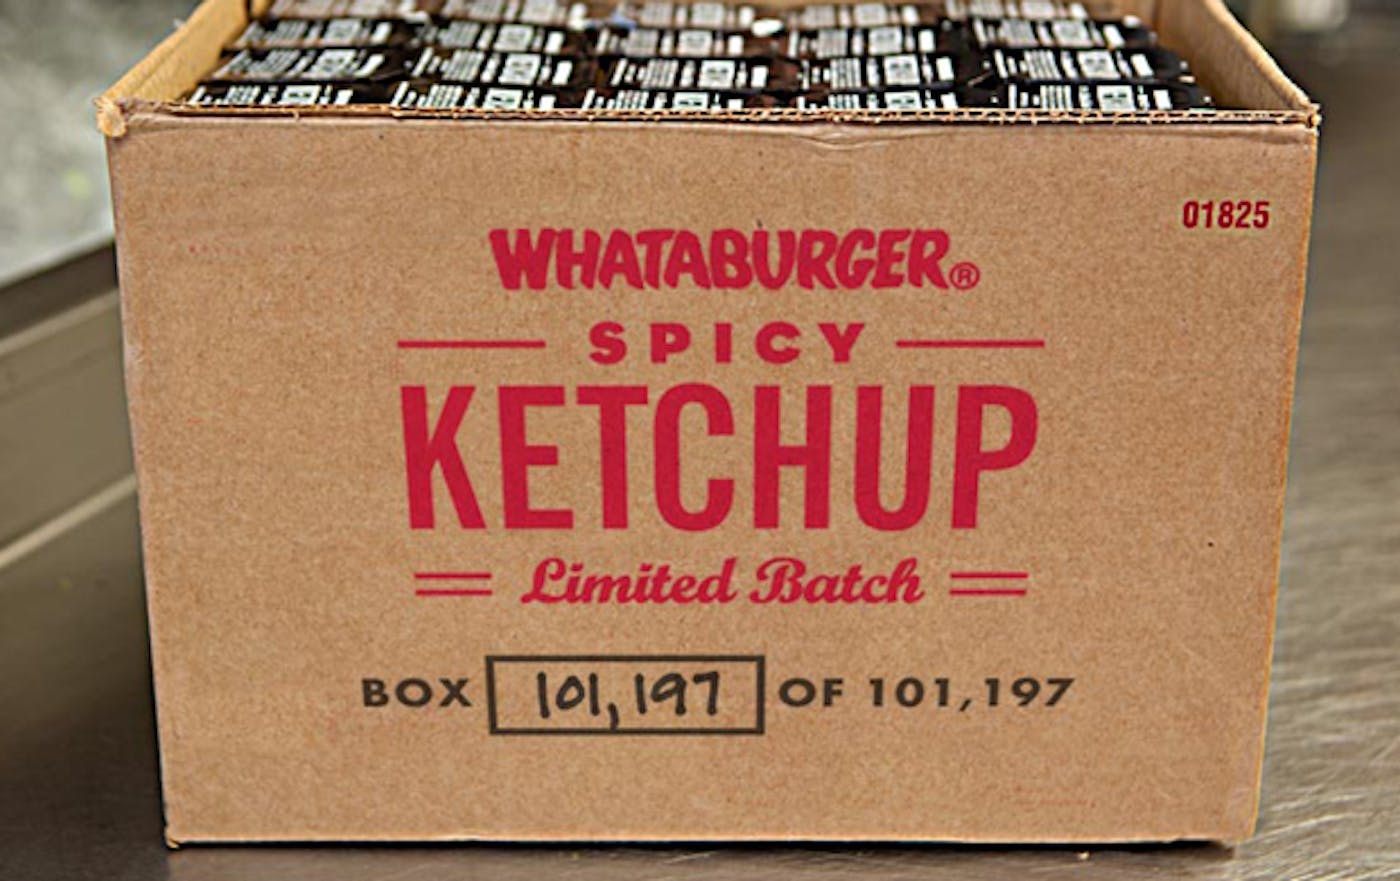 https://img.texasmonthly.com/2012/04/spicyketchup.png?auto=compress&crop=faces&fit=crop&fm=jpg&h=1050&ixlib=php-3.3.1&q=45&w=1400